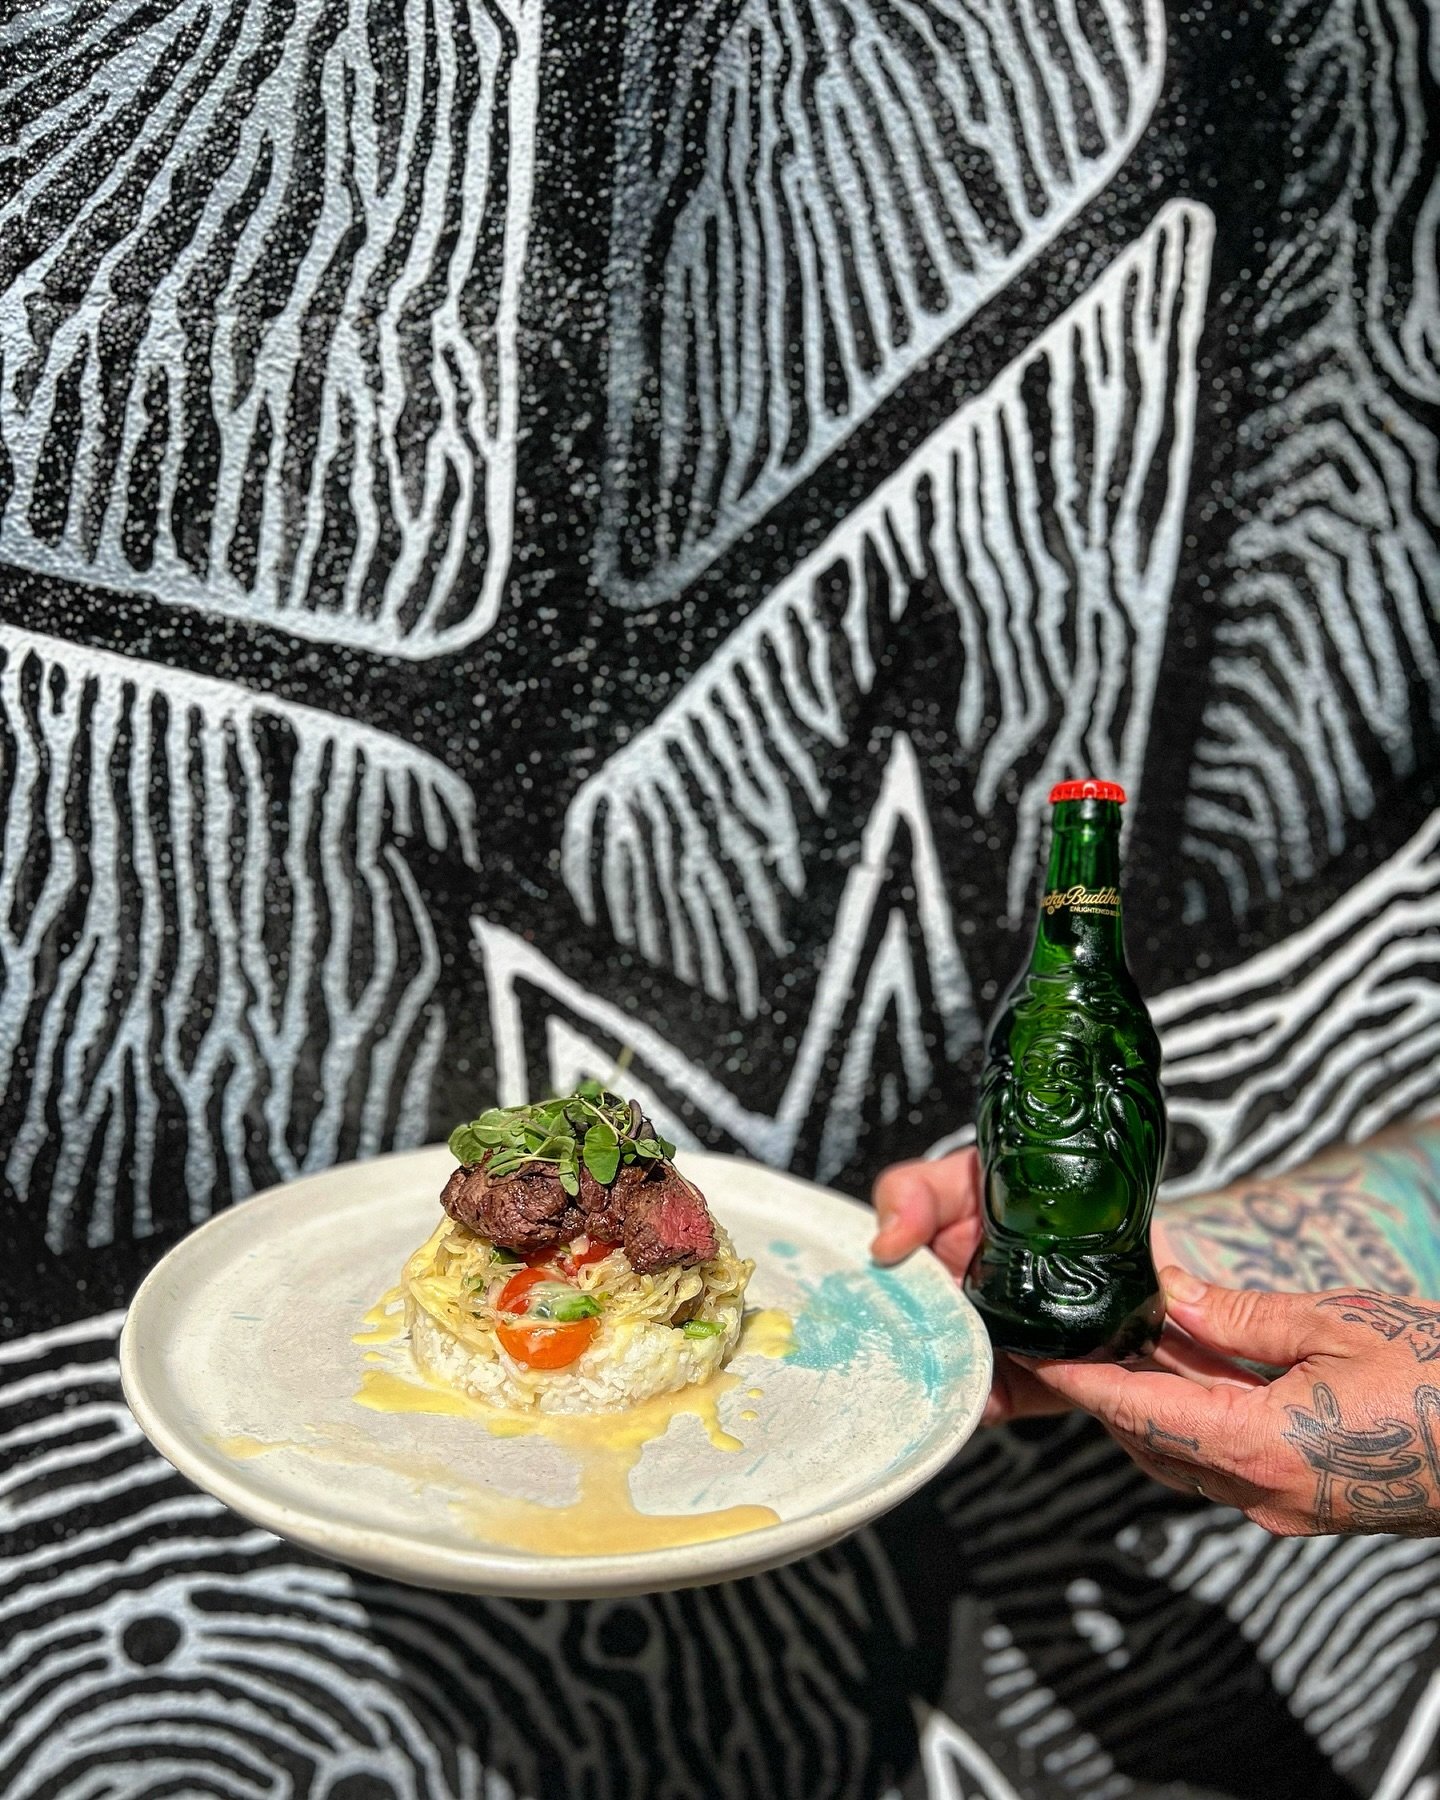 Our weekend special for 5/10! 

Sum Tum Thai 
(Our bar Manager, Alex, gives this a solid 15/10) 
Green Papaya Salad, Sliced Filet, &amp; Sticky Rice w/ Mango Vinaigrette 
Pair it with the Lucky Buddha Beer! A light, Asian lager brewed and bottled in 